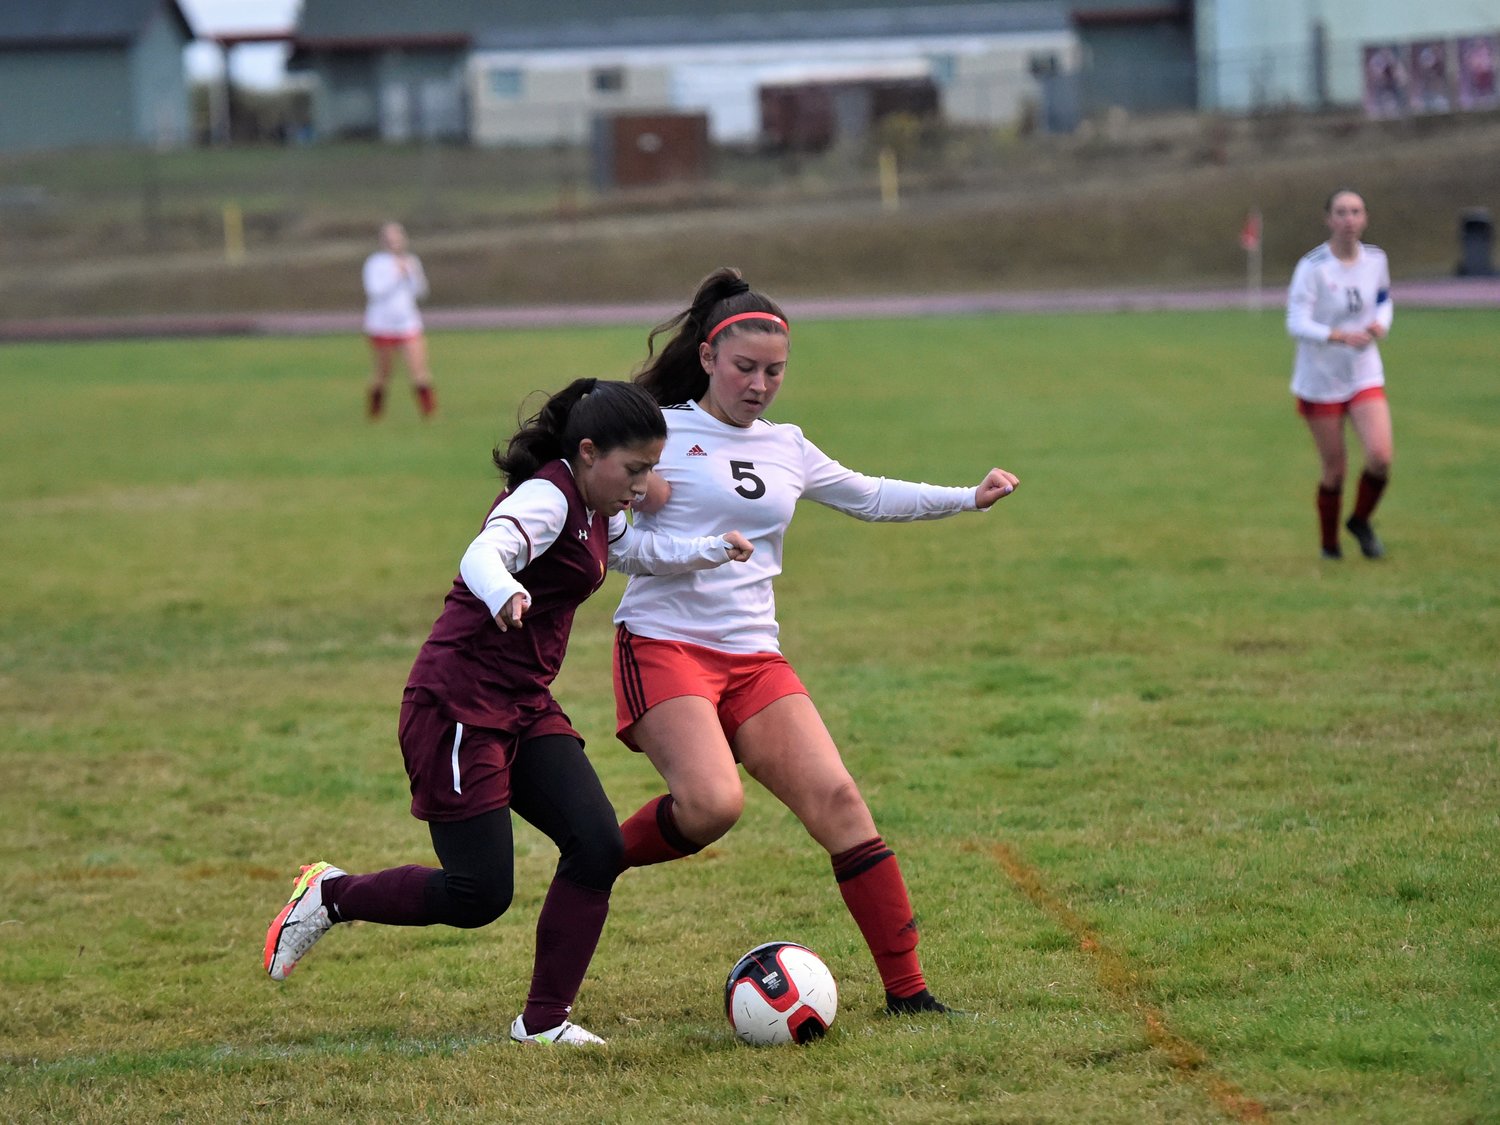 Toledo’s Maritza Salmeron fights for possession with a Winlock defender during a match on Sept. 29, 2021.